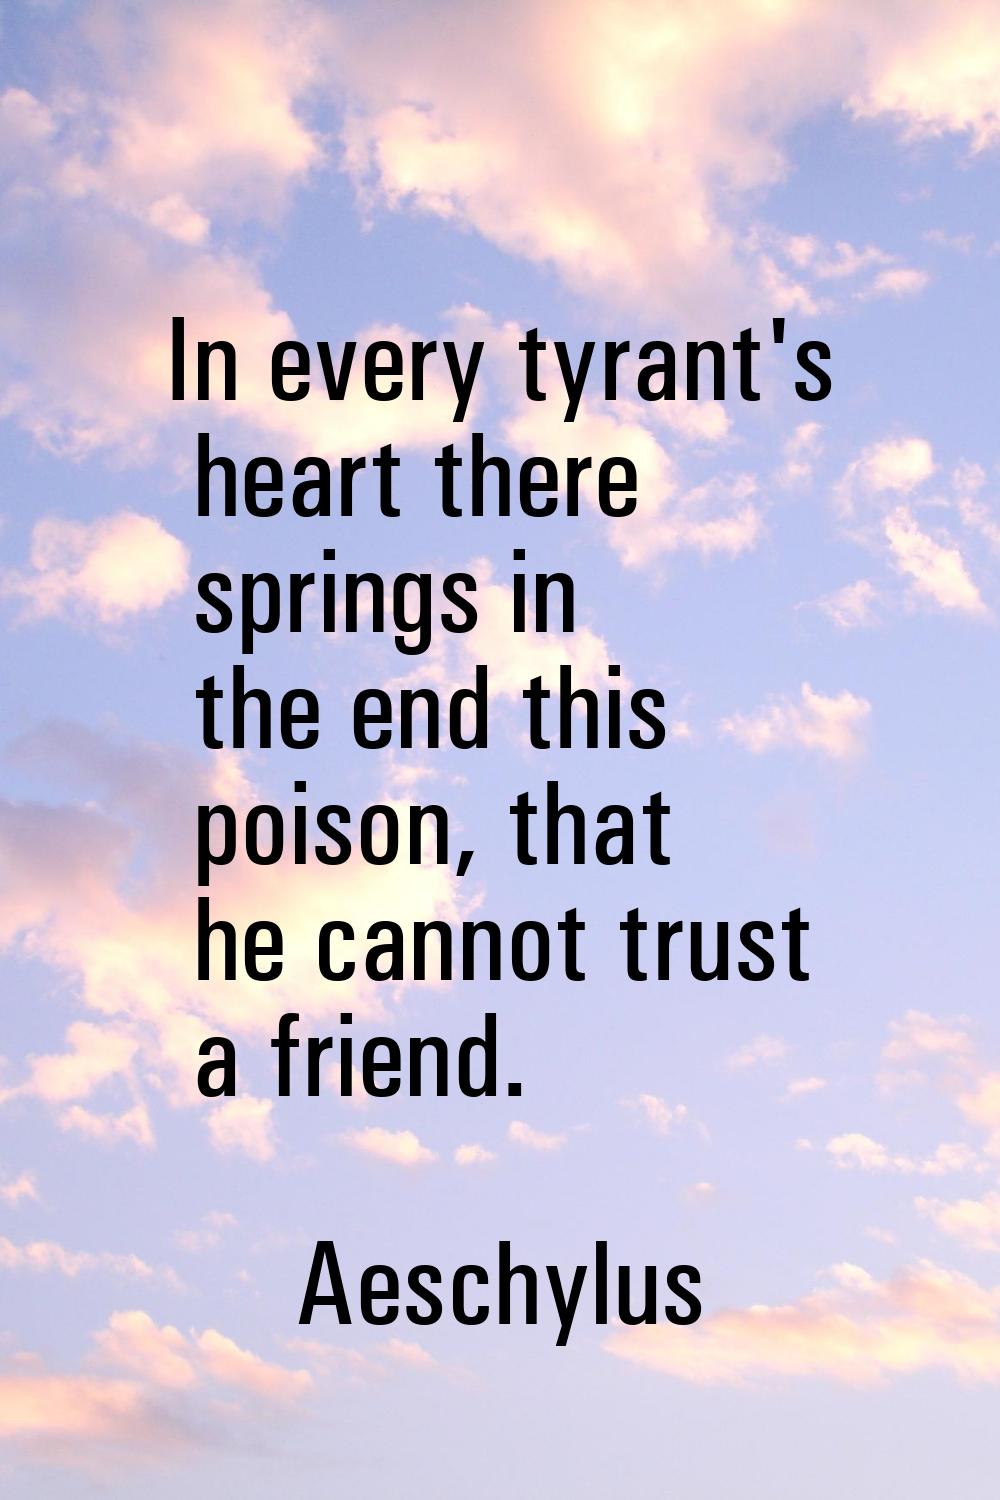 In every tyrant's heart there springs in the end this poison, that he cannot trust a friend.